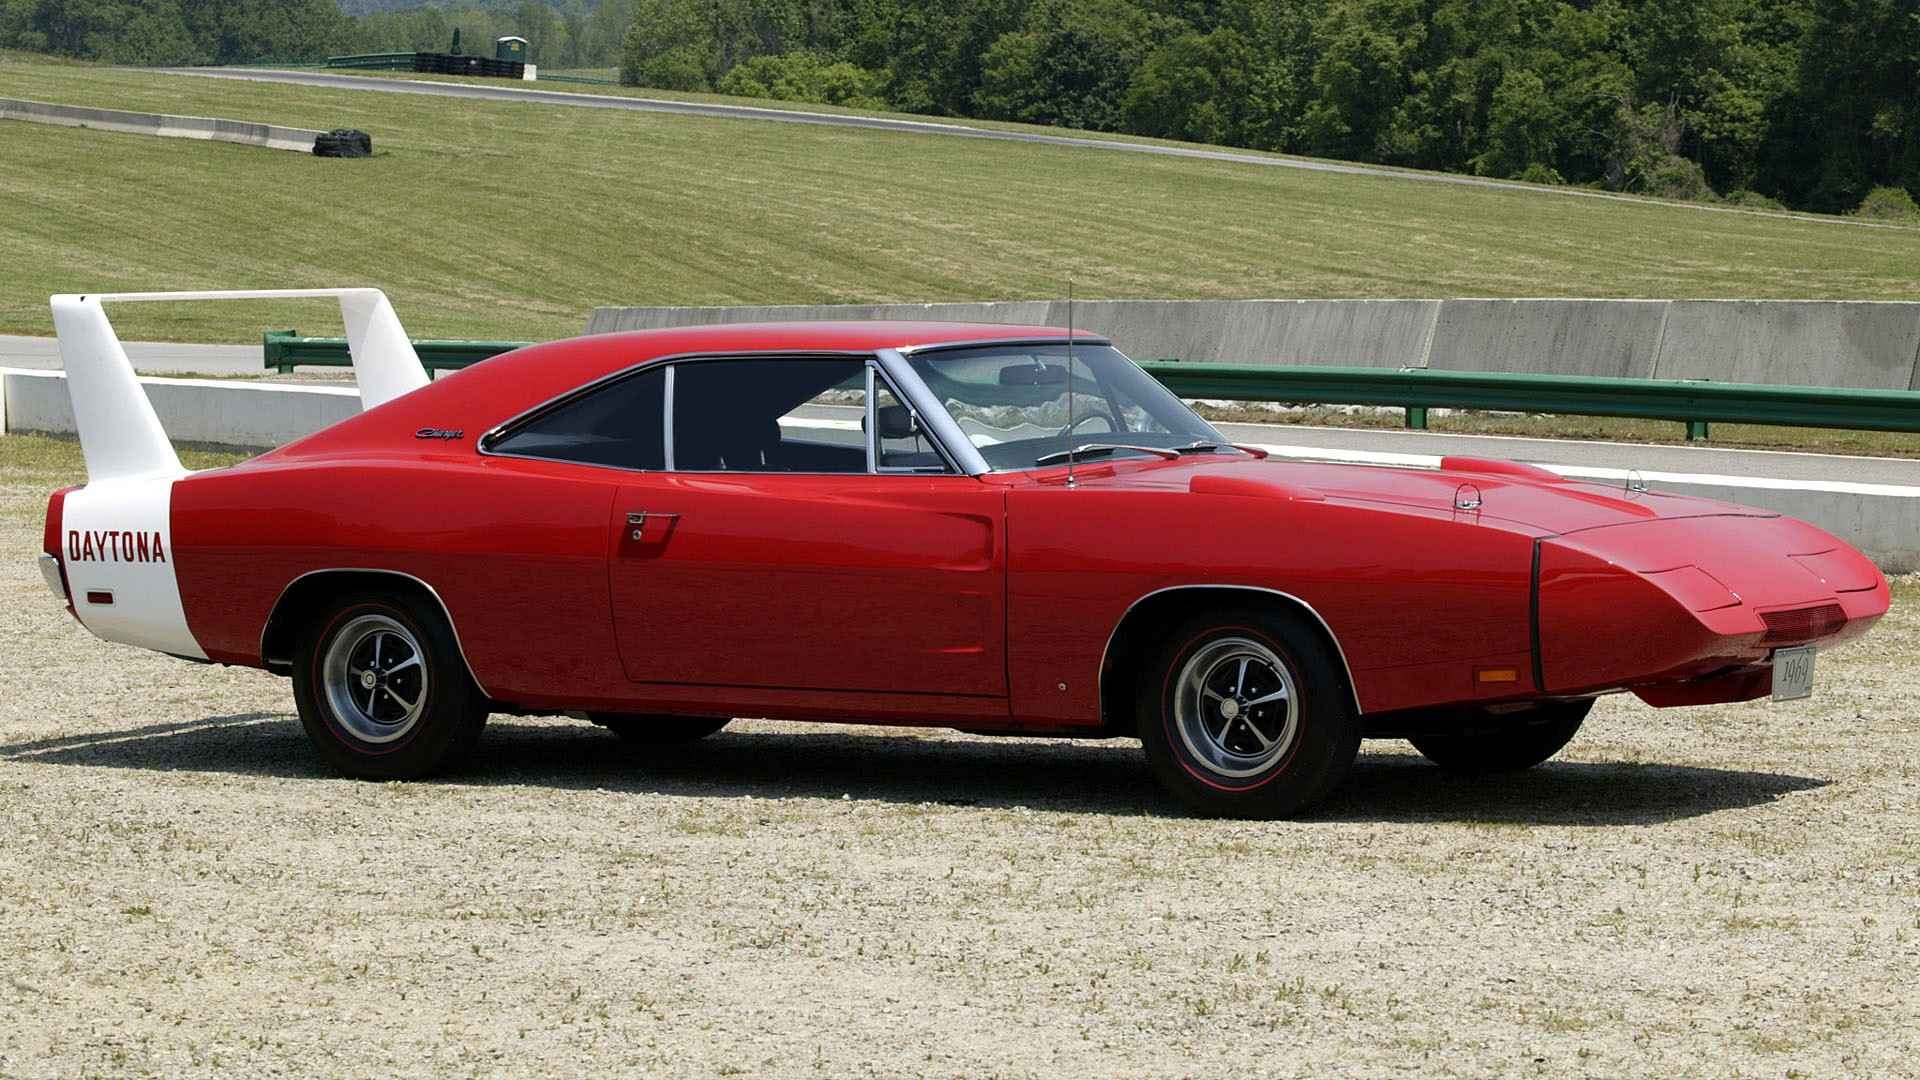 General 1920x1080 red cars car vehicle Dodge Charger Dodge Charger Daytona muscle cars American cars